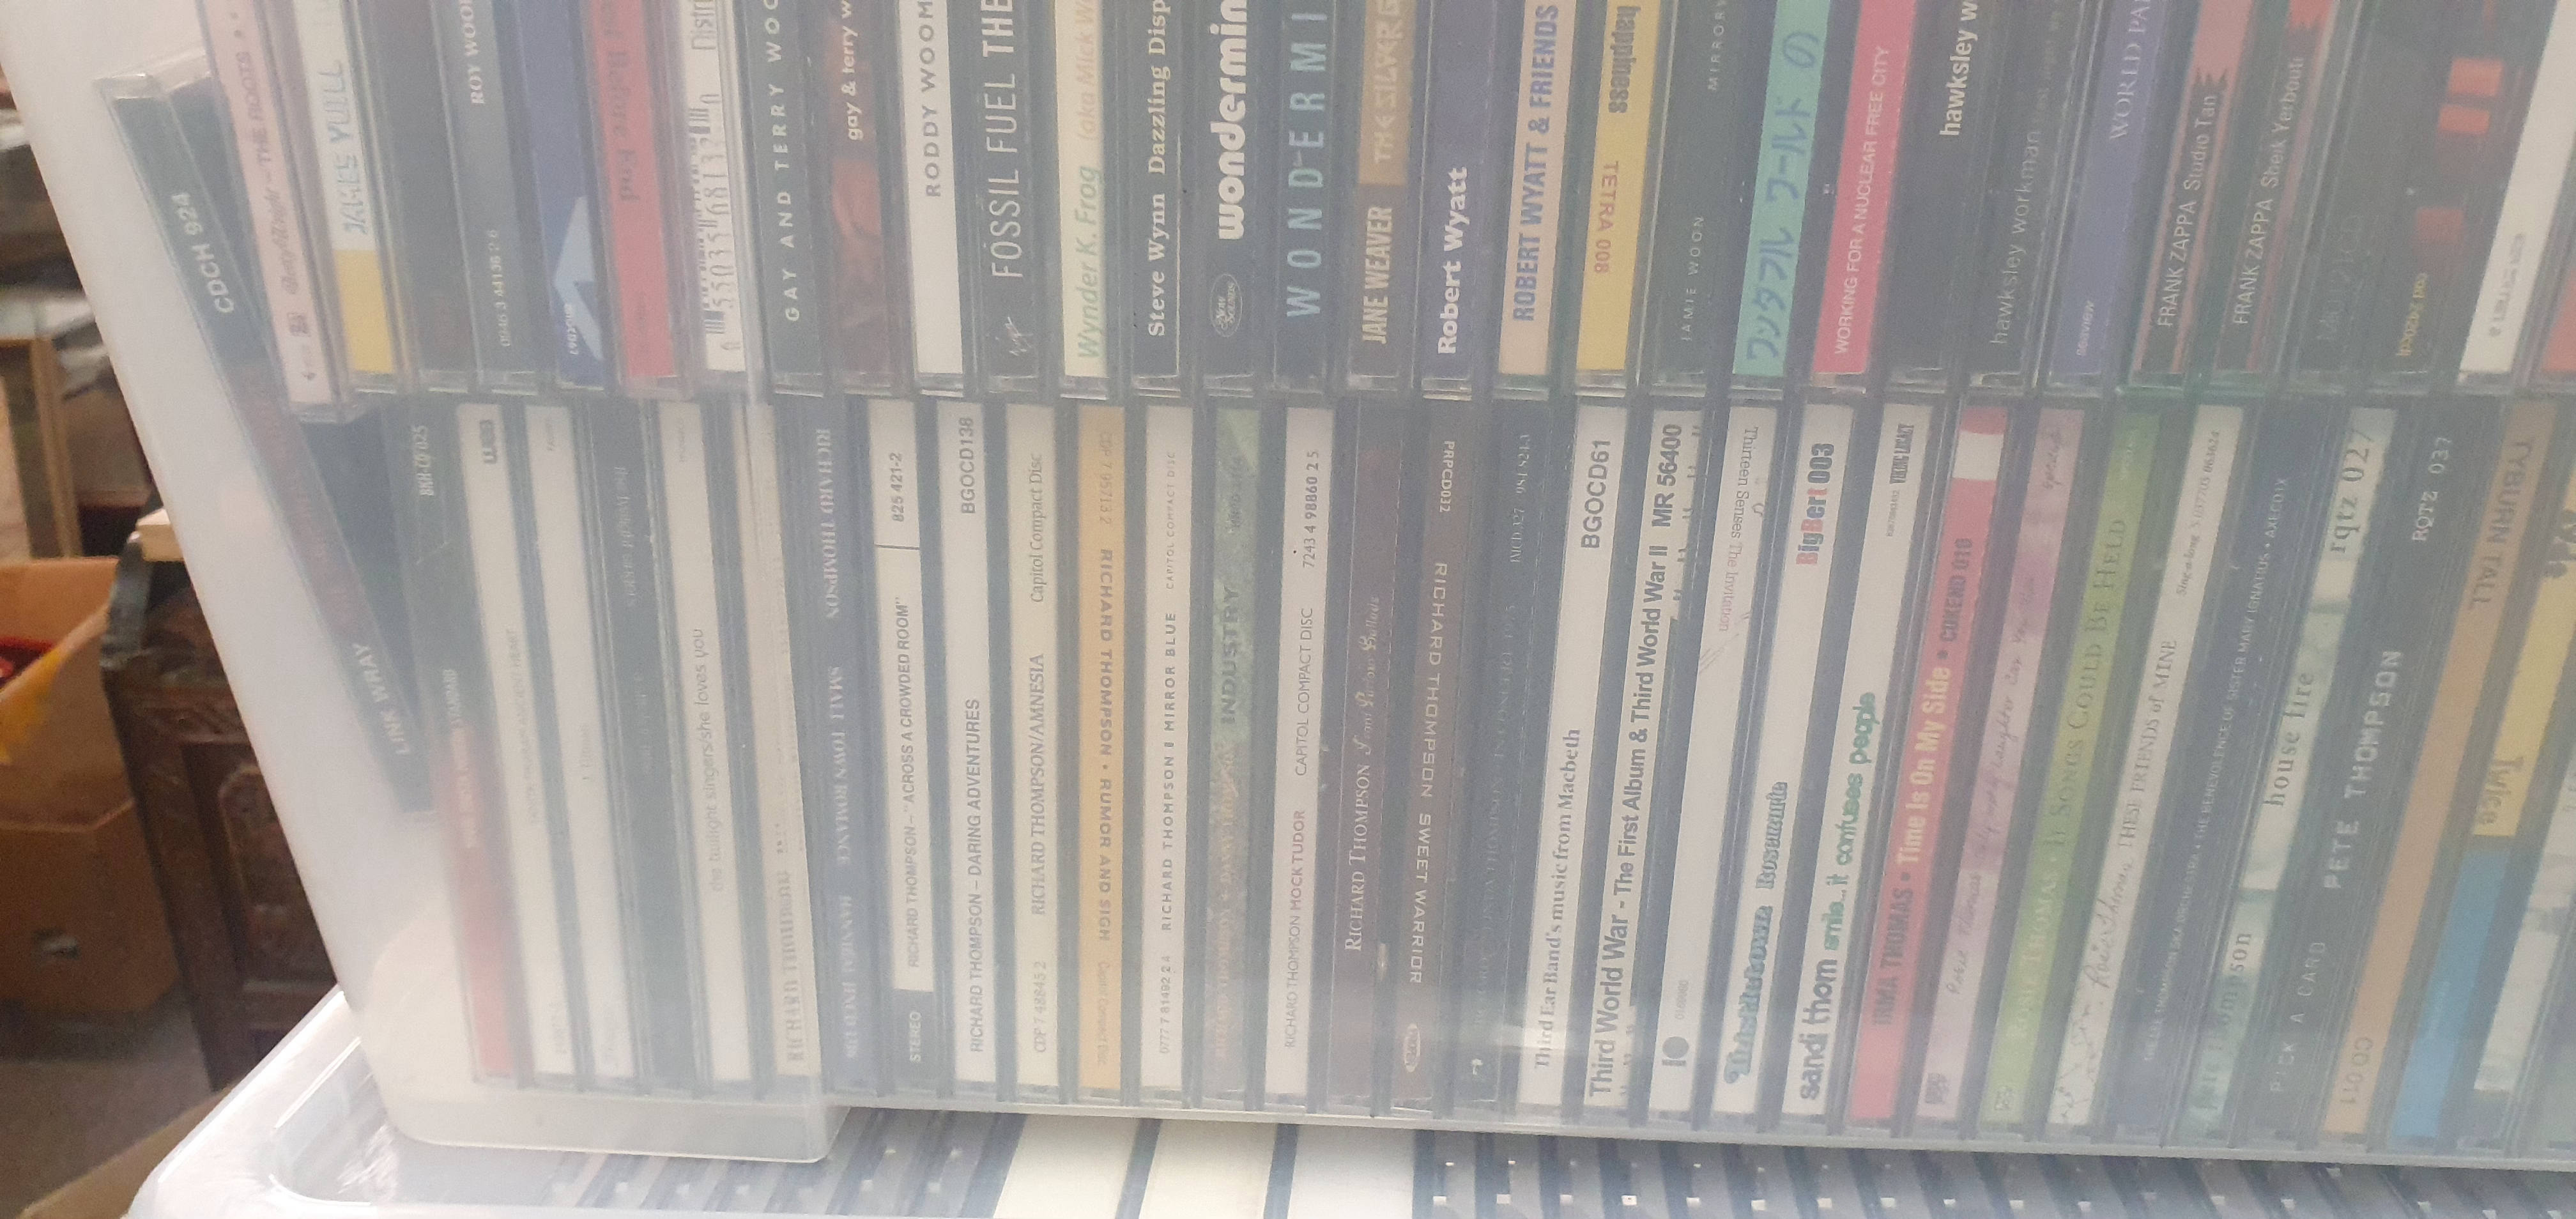 LARGE COLLECTION OF APPROXIMATELY 200 MUSIC CD'S - Image 9 of 9